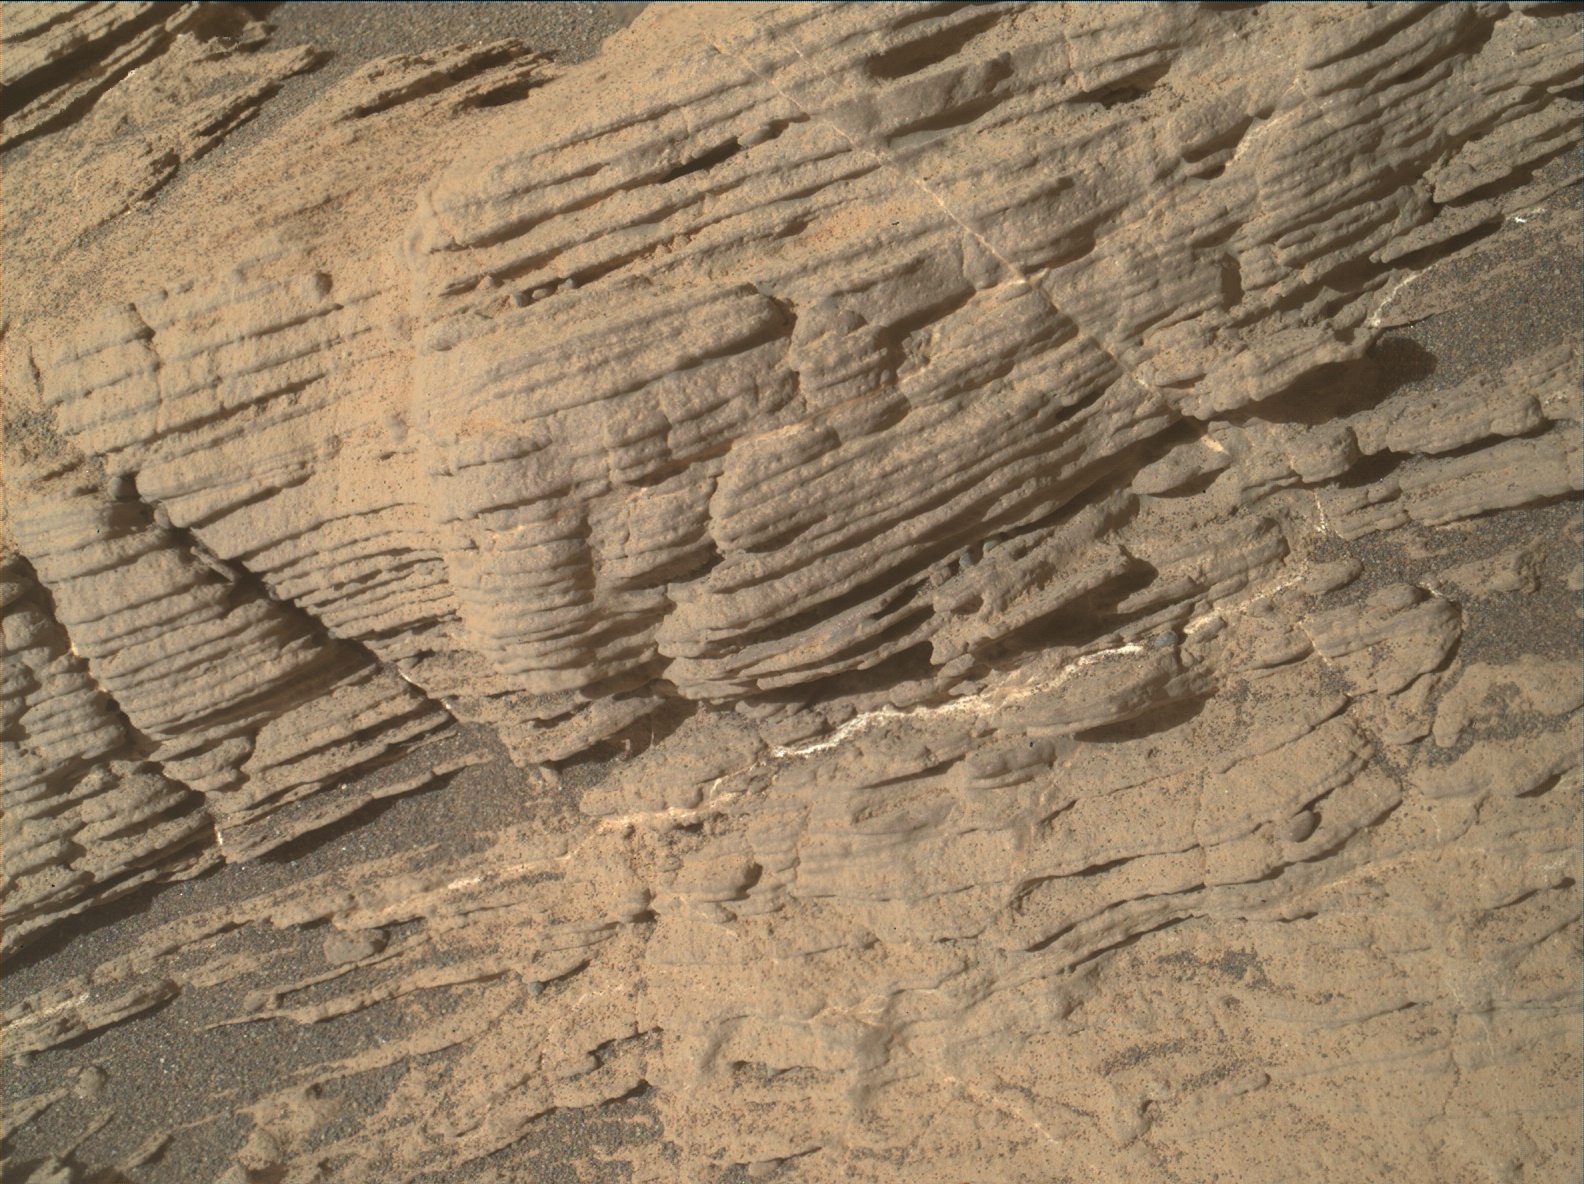 Nasa's Mars rover Curiosity acquired this image using its Mars Hand Lens Imager (MAHLI) on Sol 2448